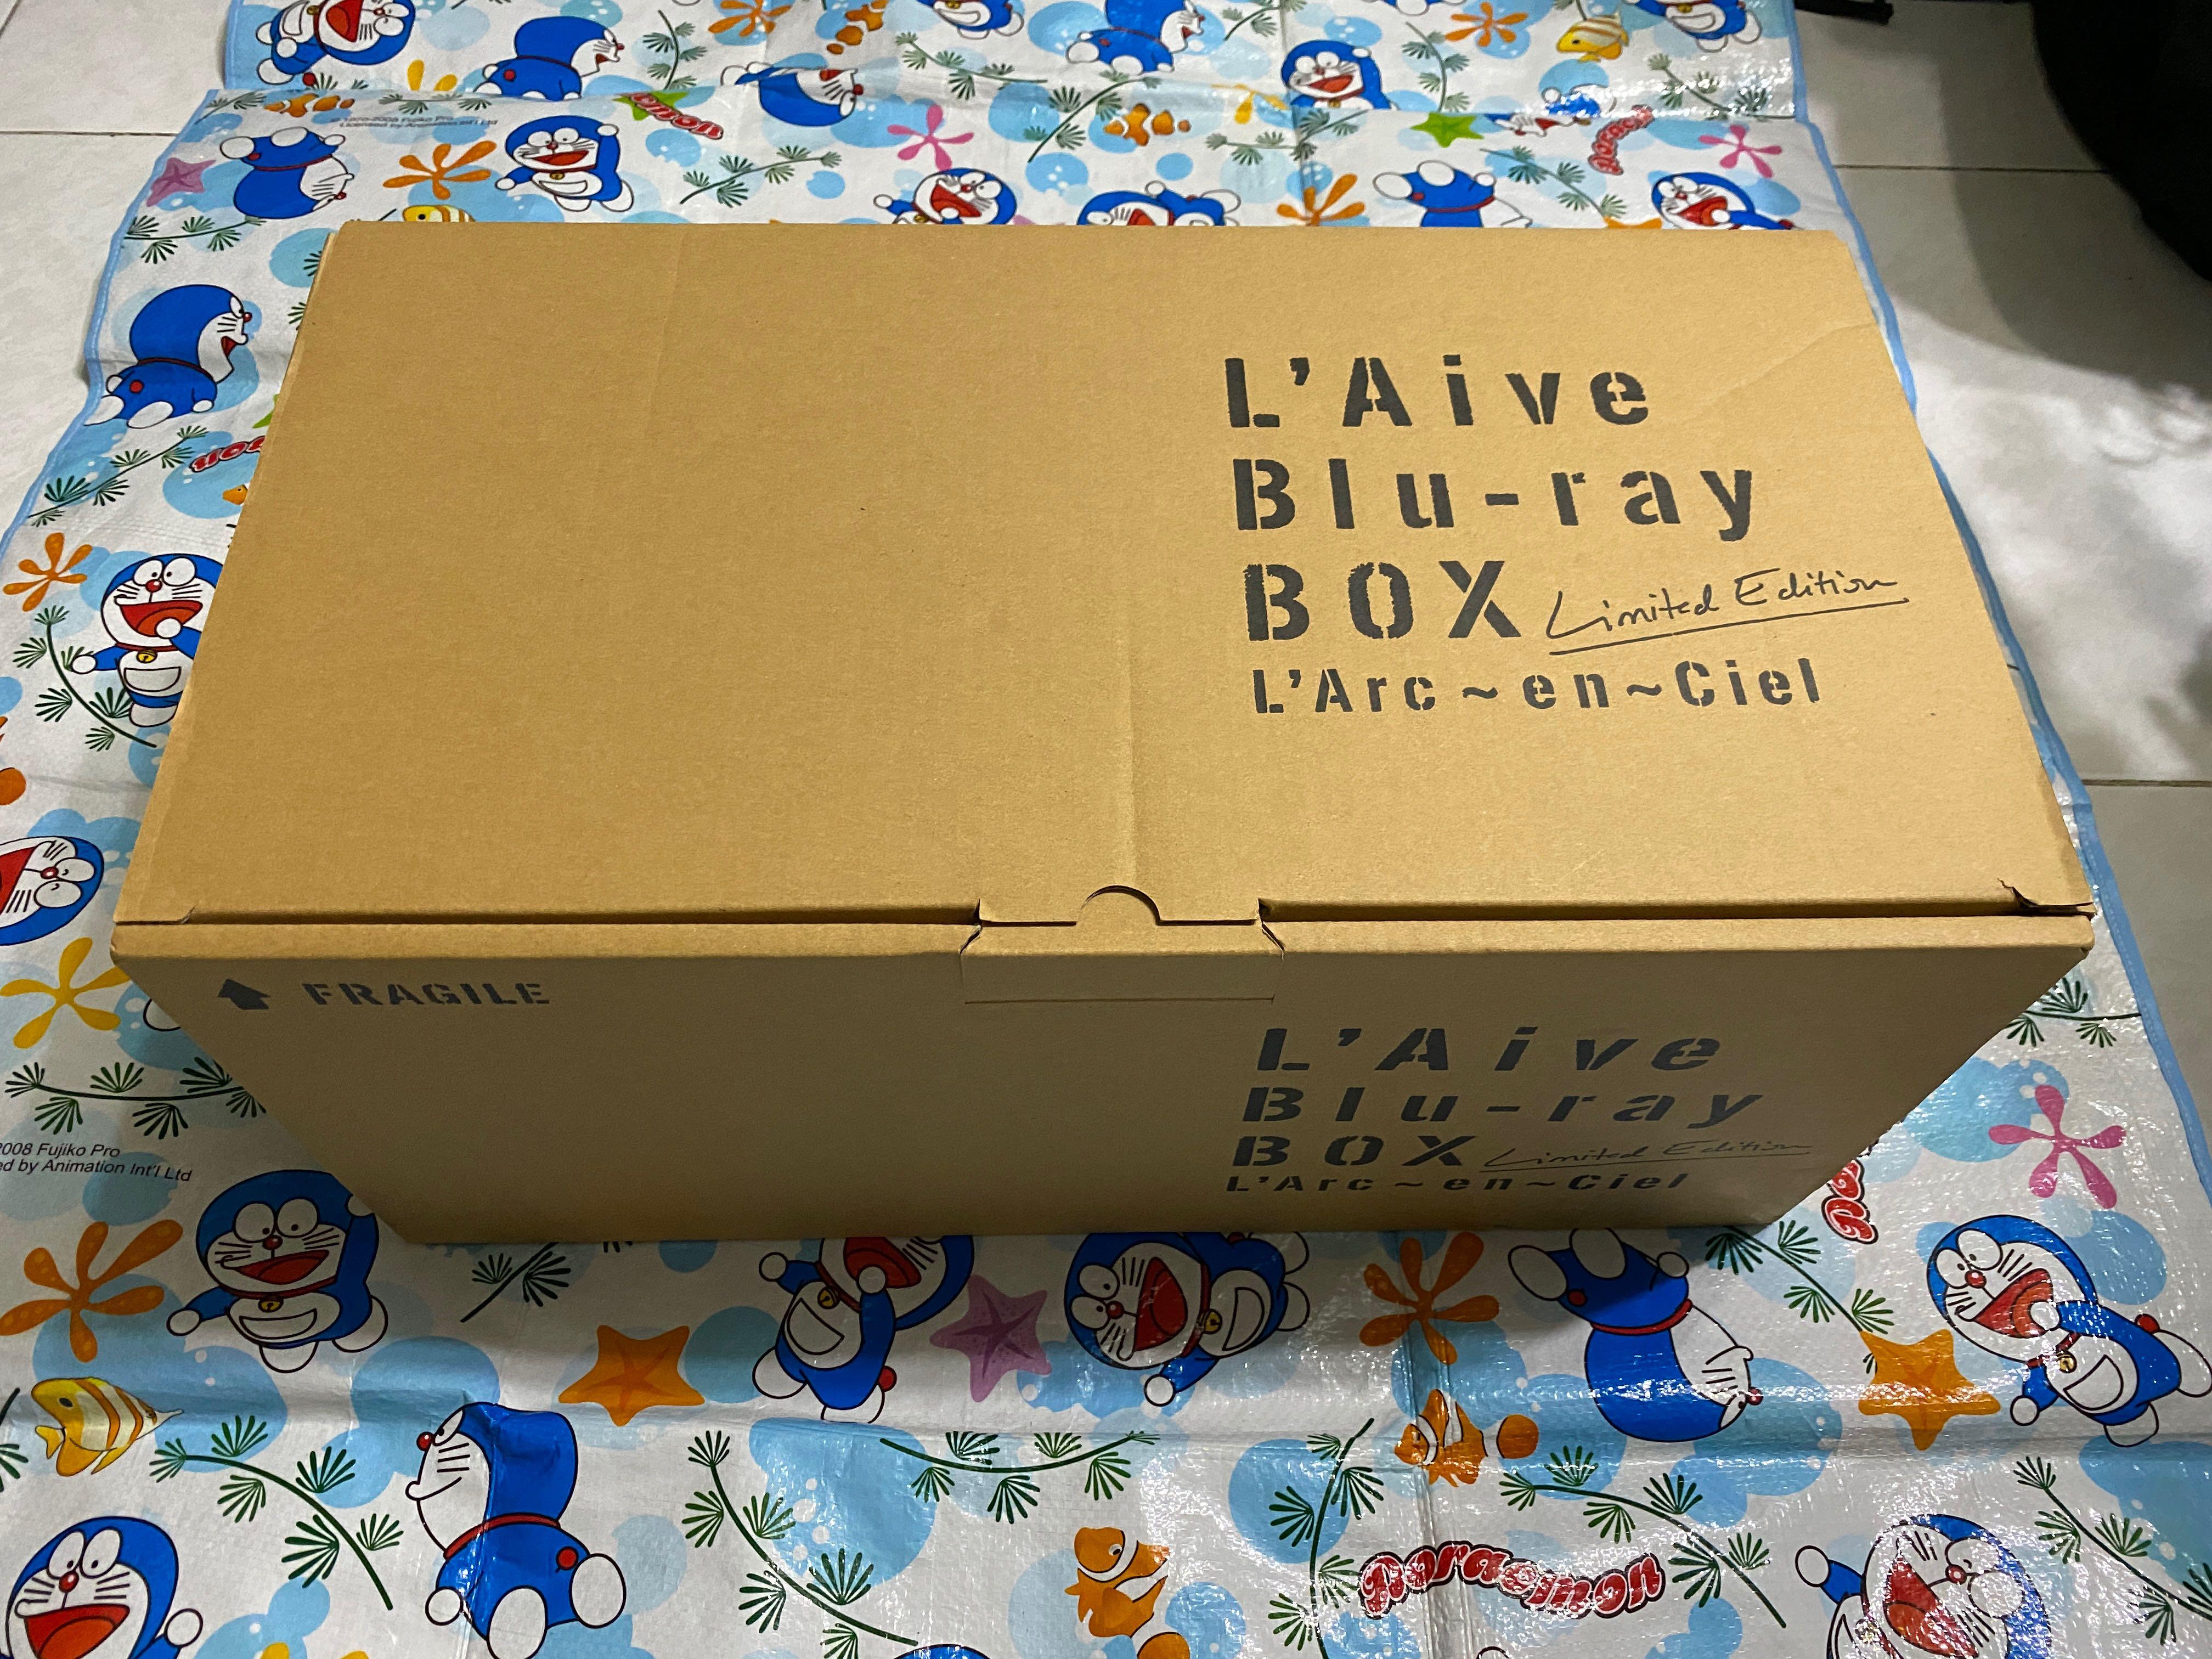 L'Aive Blu-ray BOX-Limited Edition--